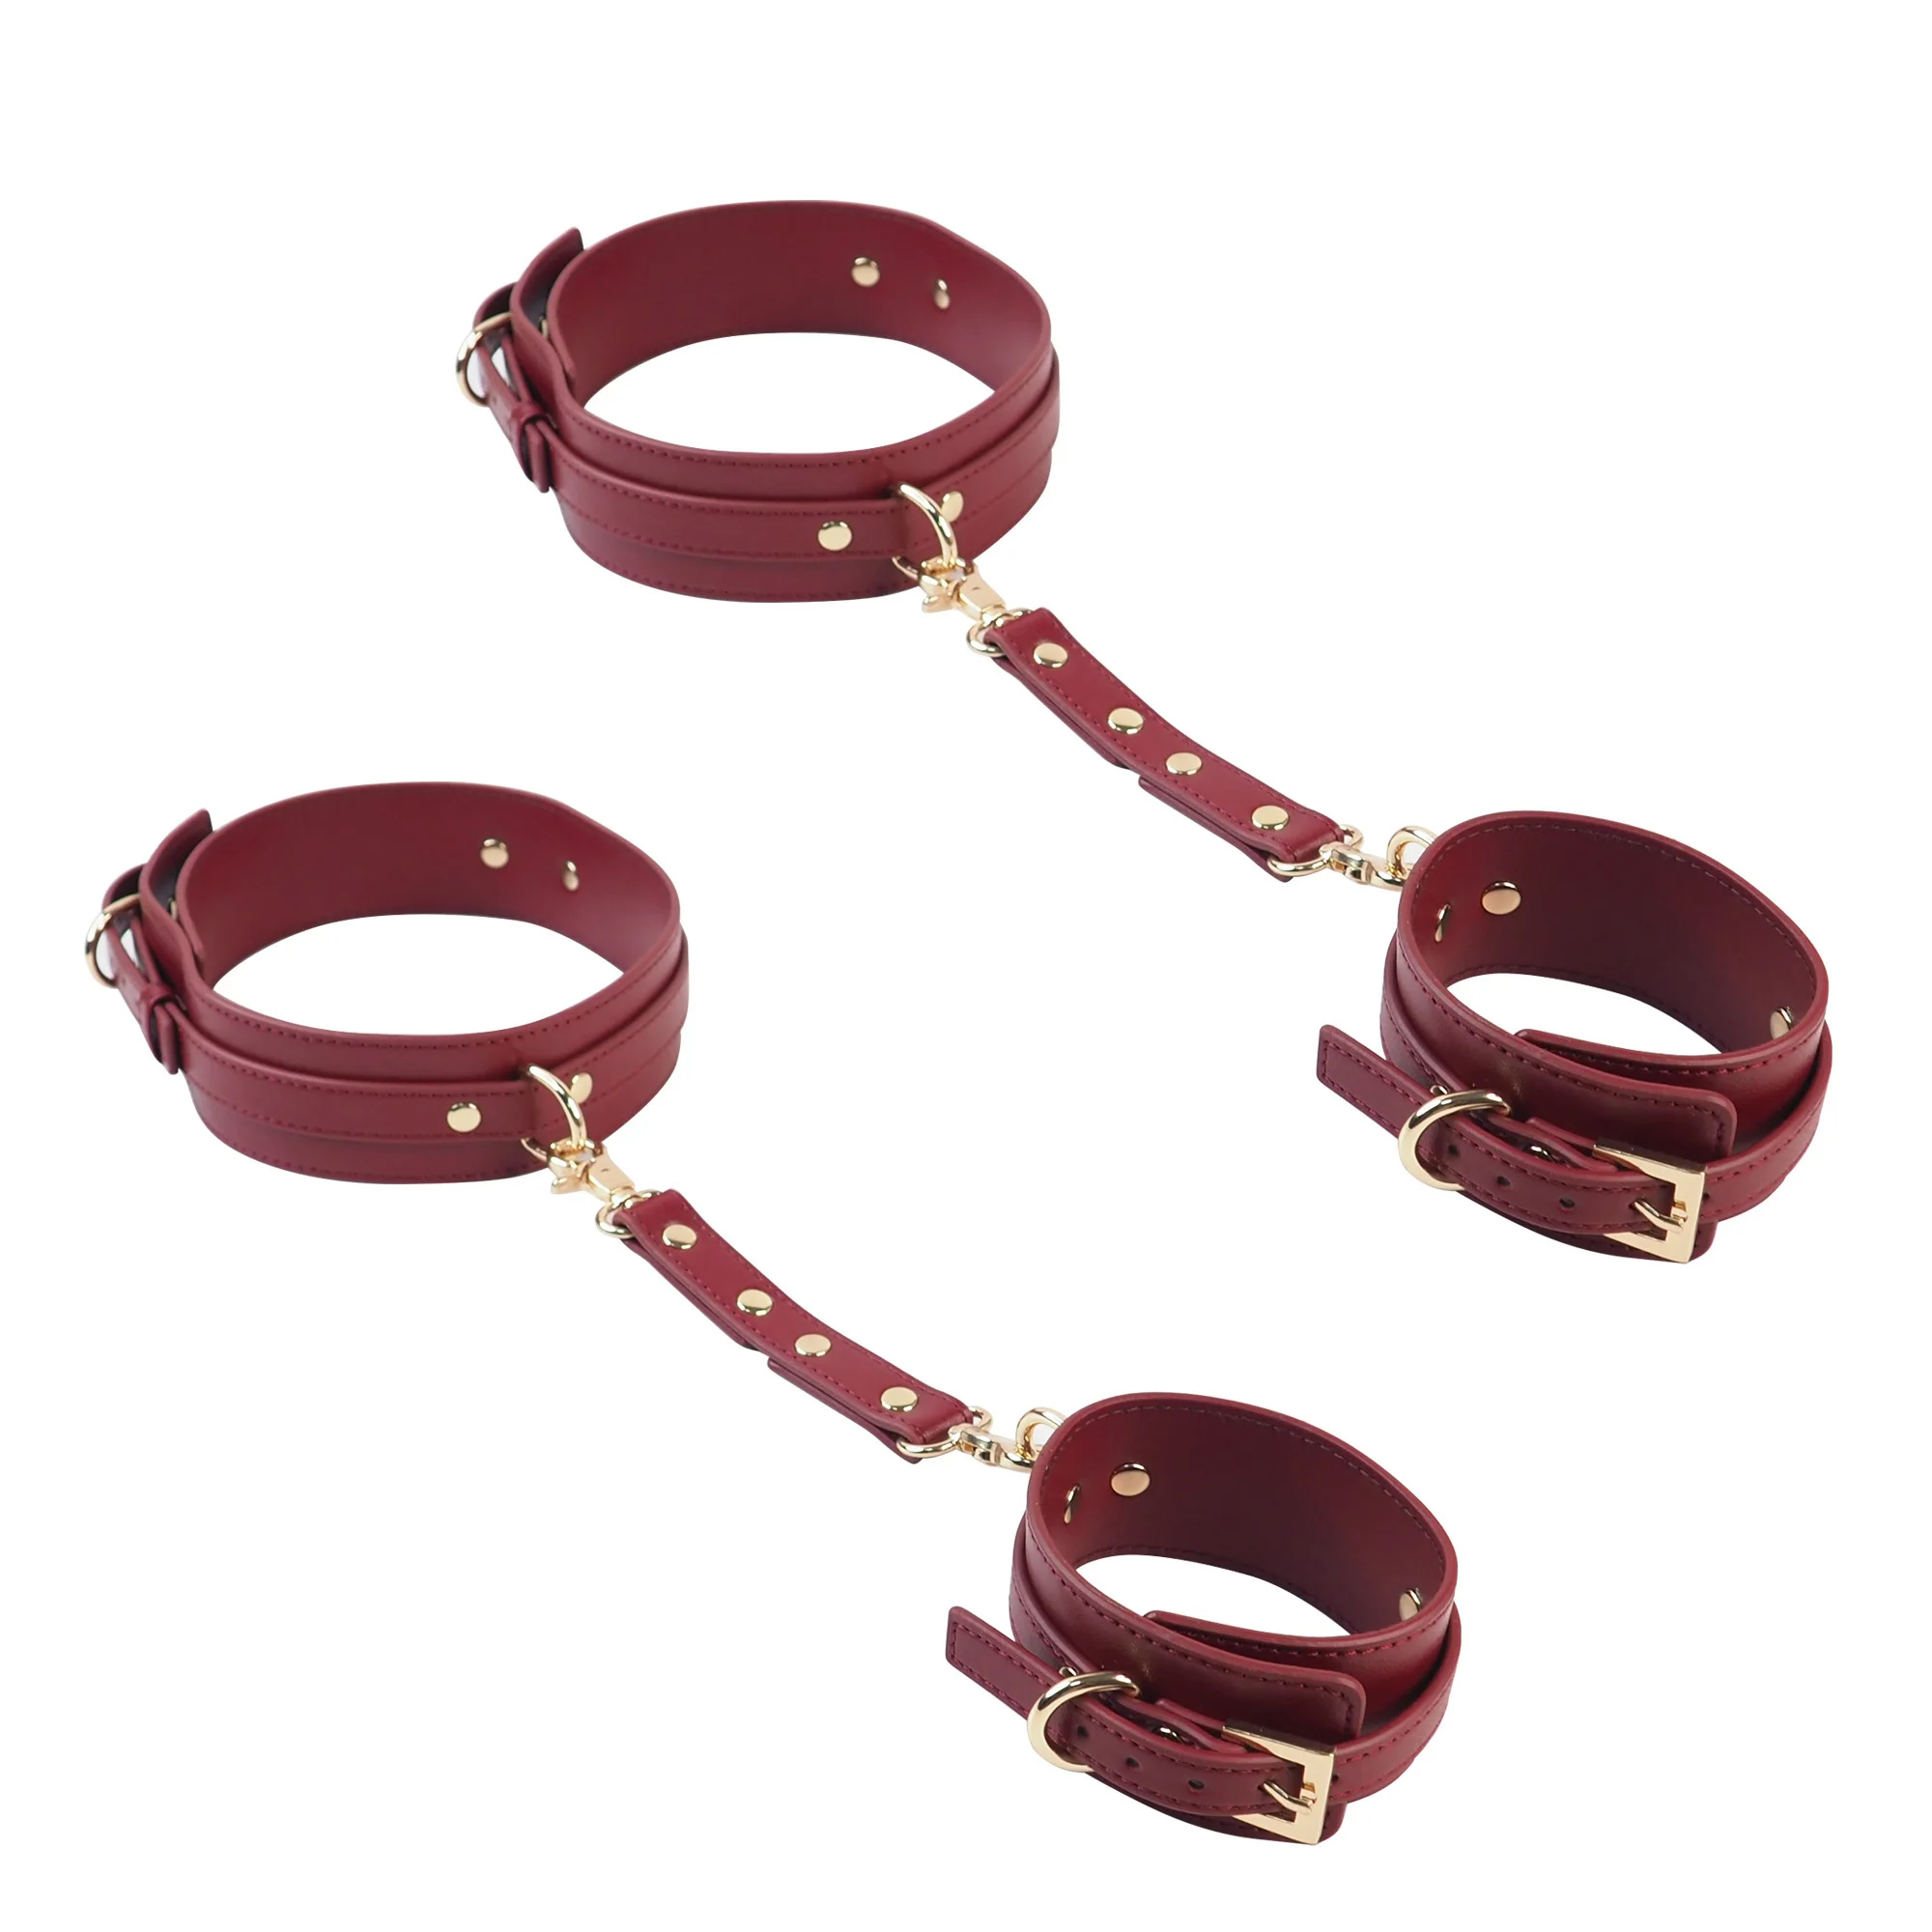 

2pcs Set Crocodile Pattern Pu Leather Handcuffs And Leg Cuffs Adult Bondage BDSM Erotic Supplies Split Legs With Hands Connected